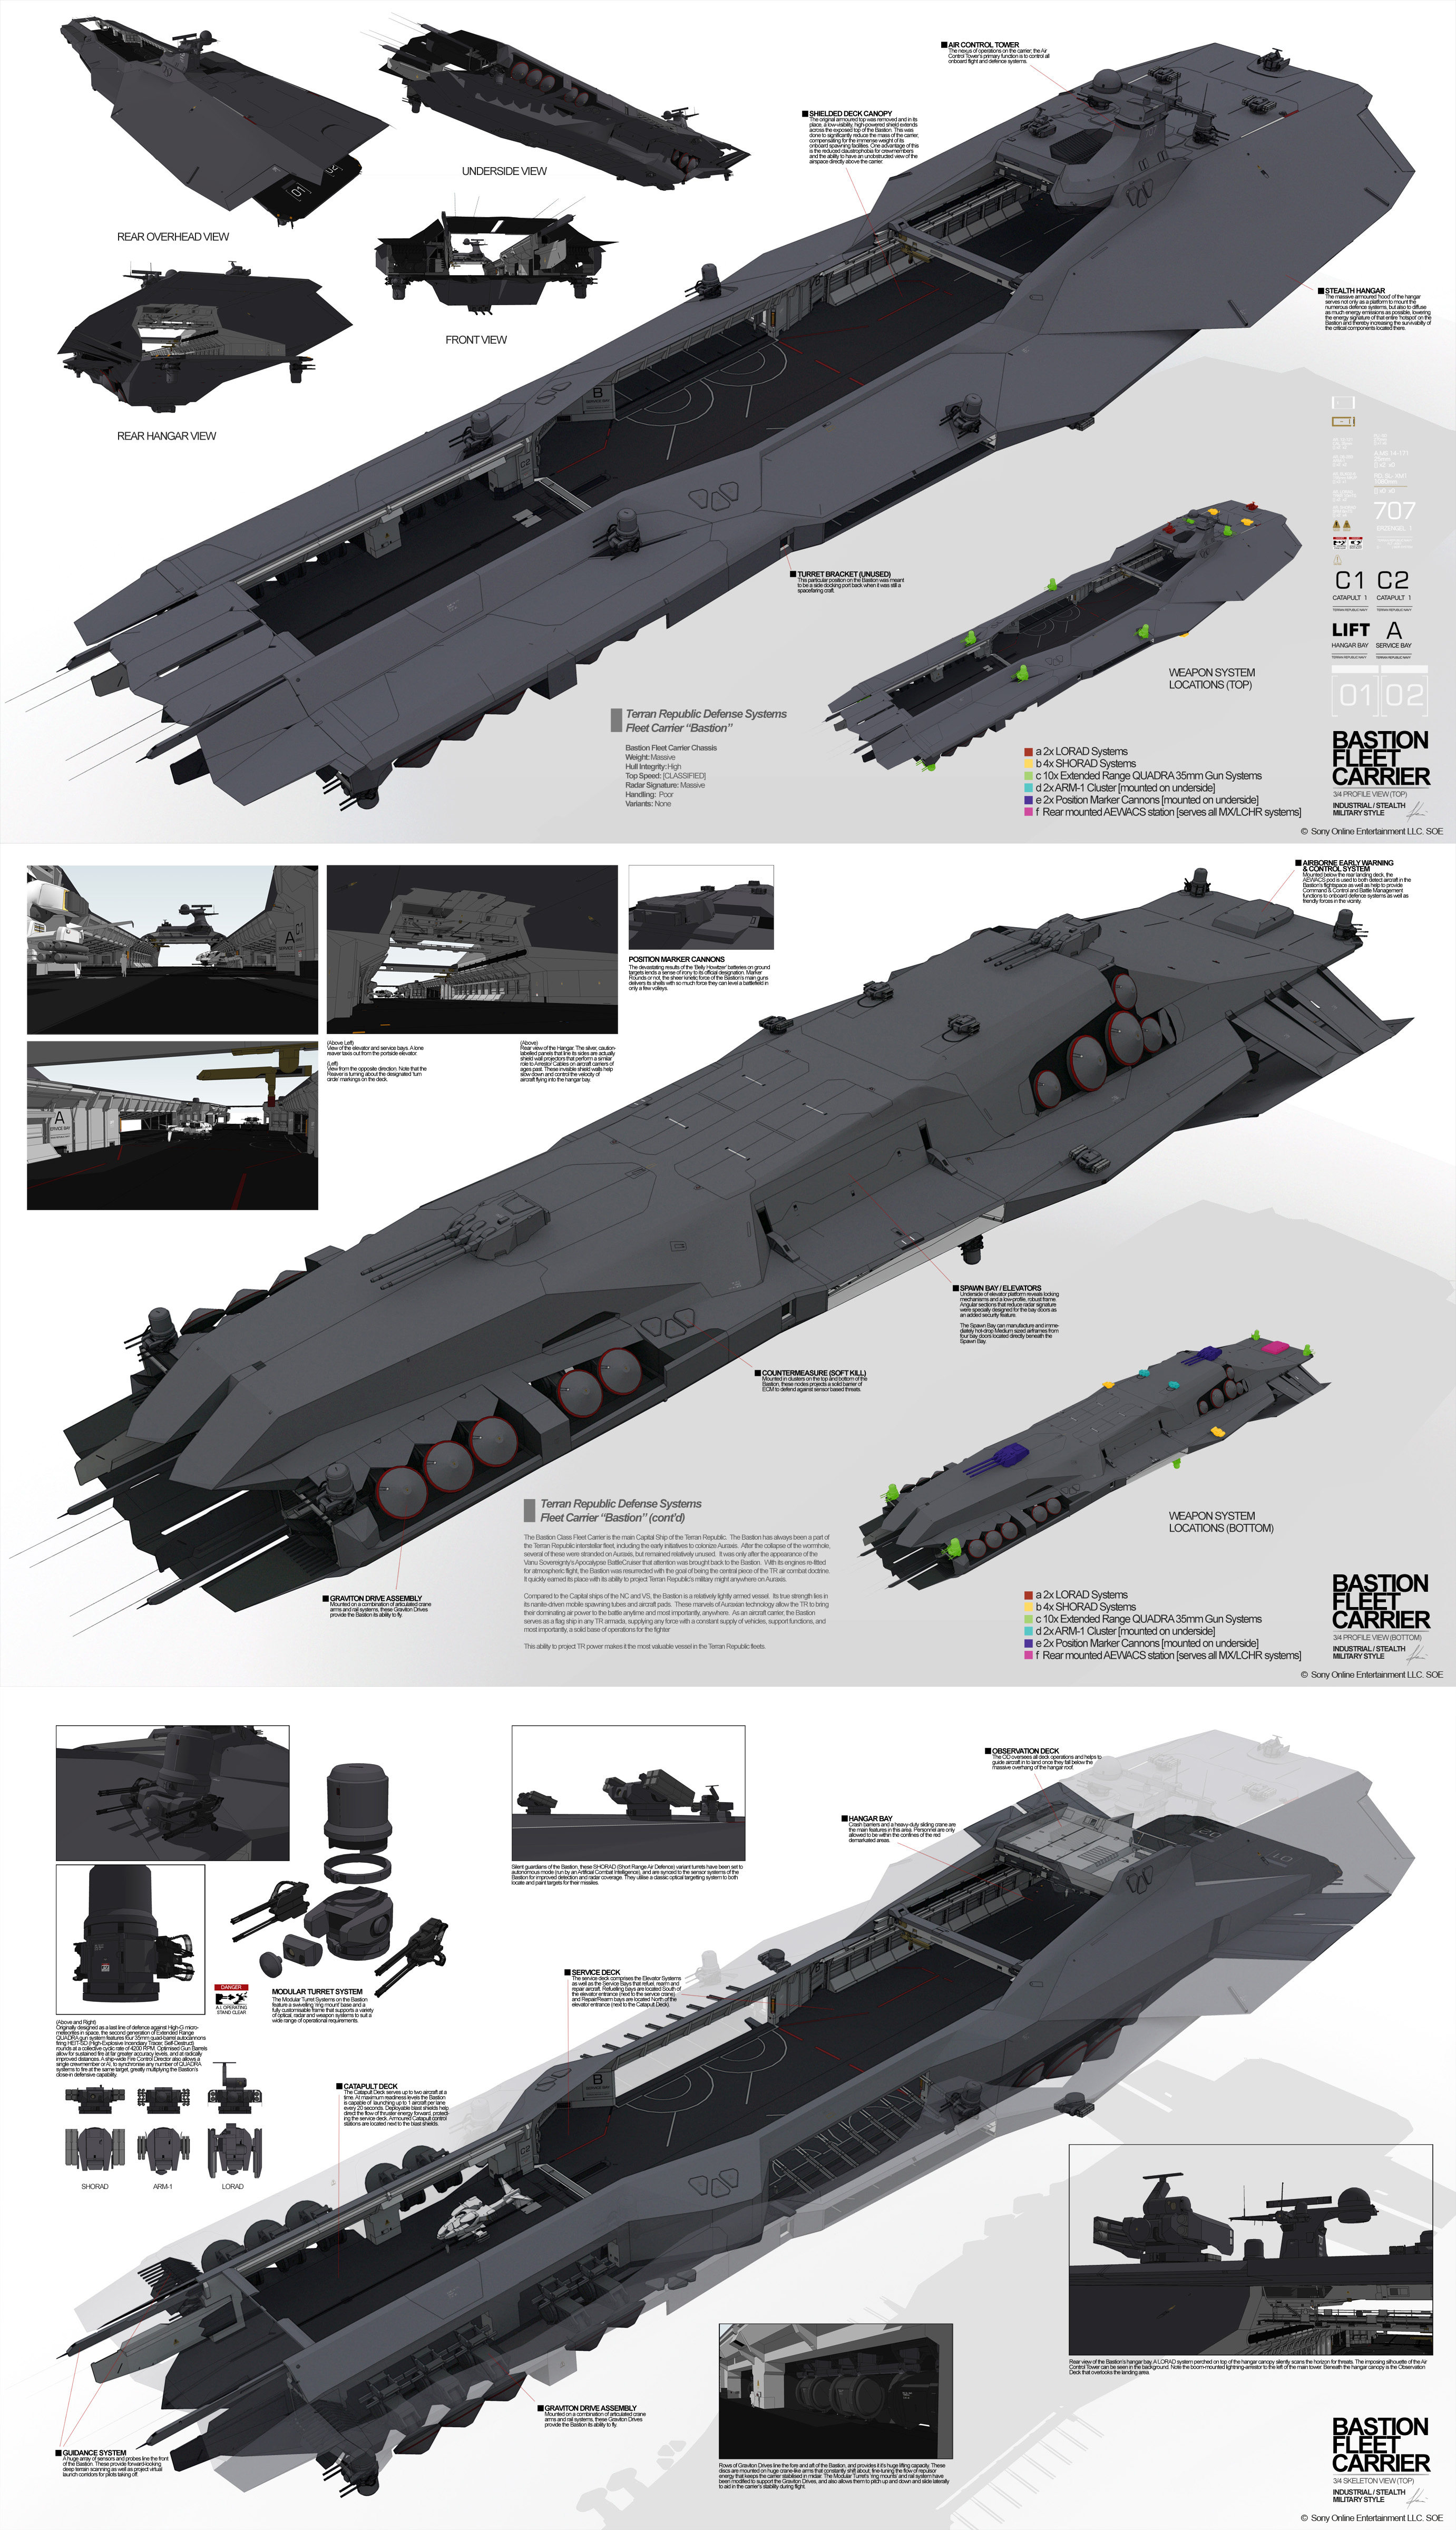 aircraft carrier favourites by canisresolutus on deviantart